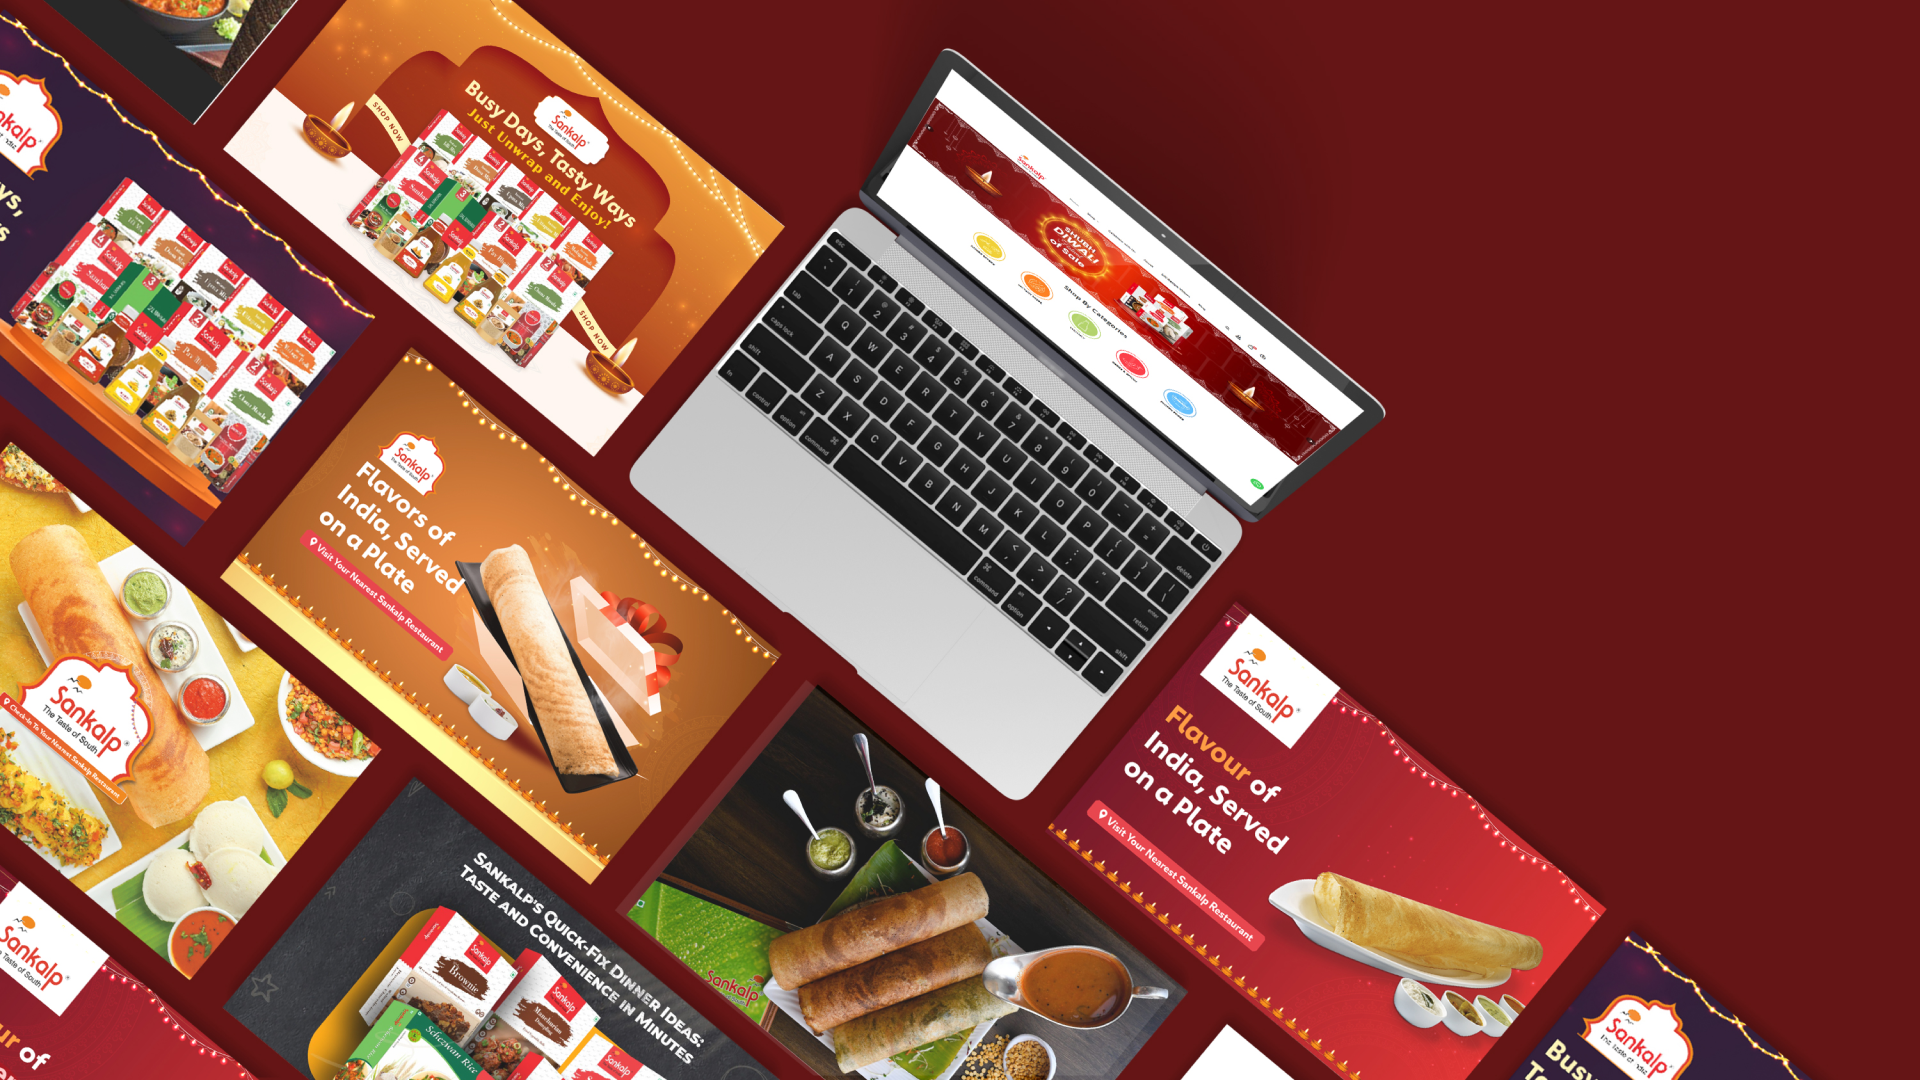 Sankalp's ready-to-eat food products are displayed on a laptop, showcasing their eCommerce SEO services for enhanced visibility and online success